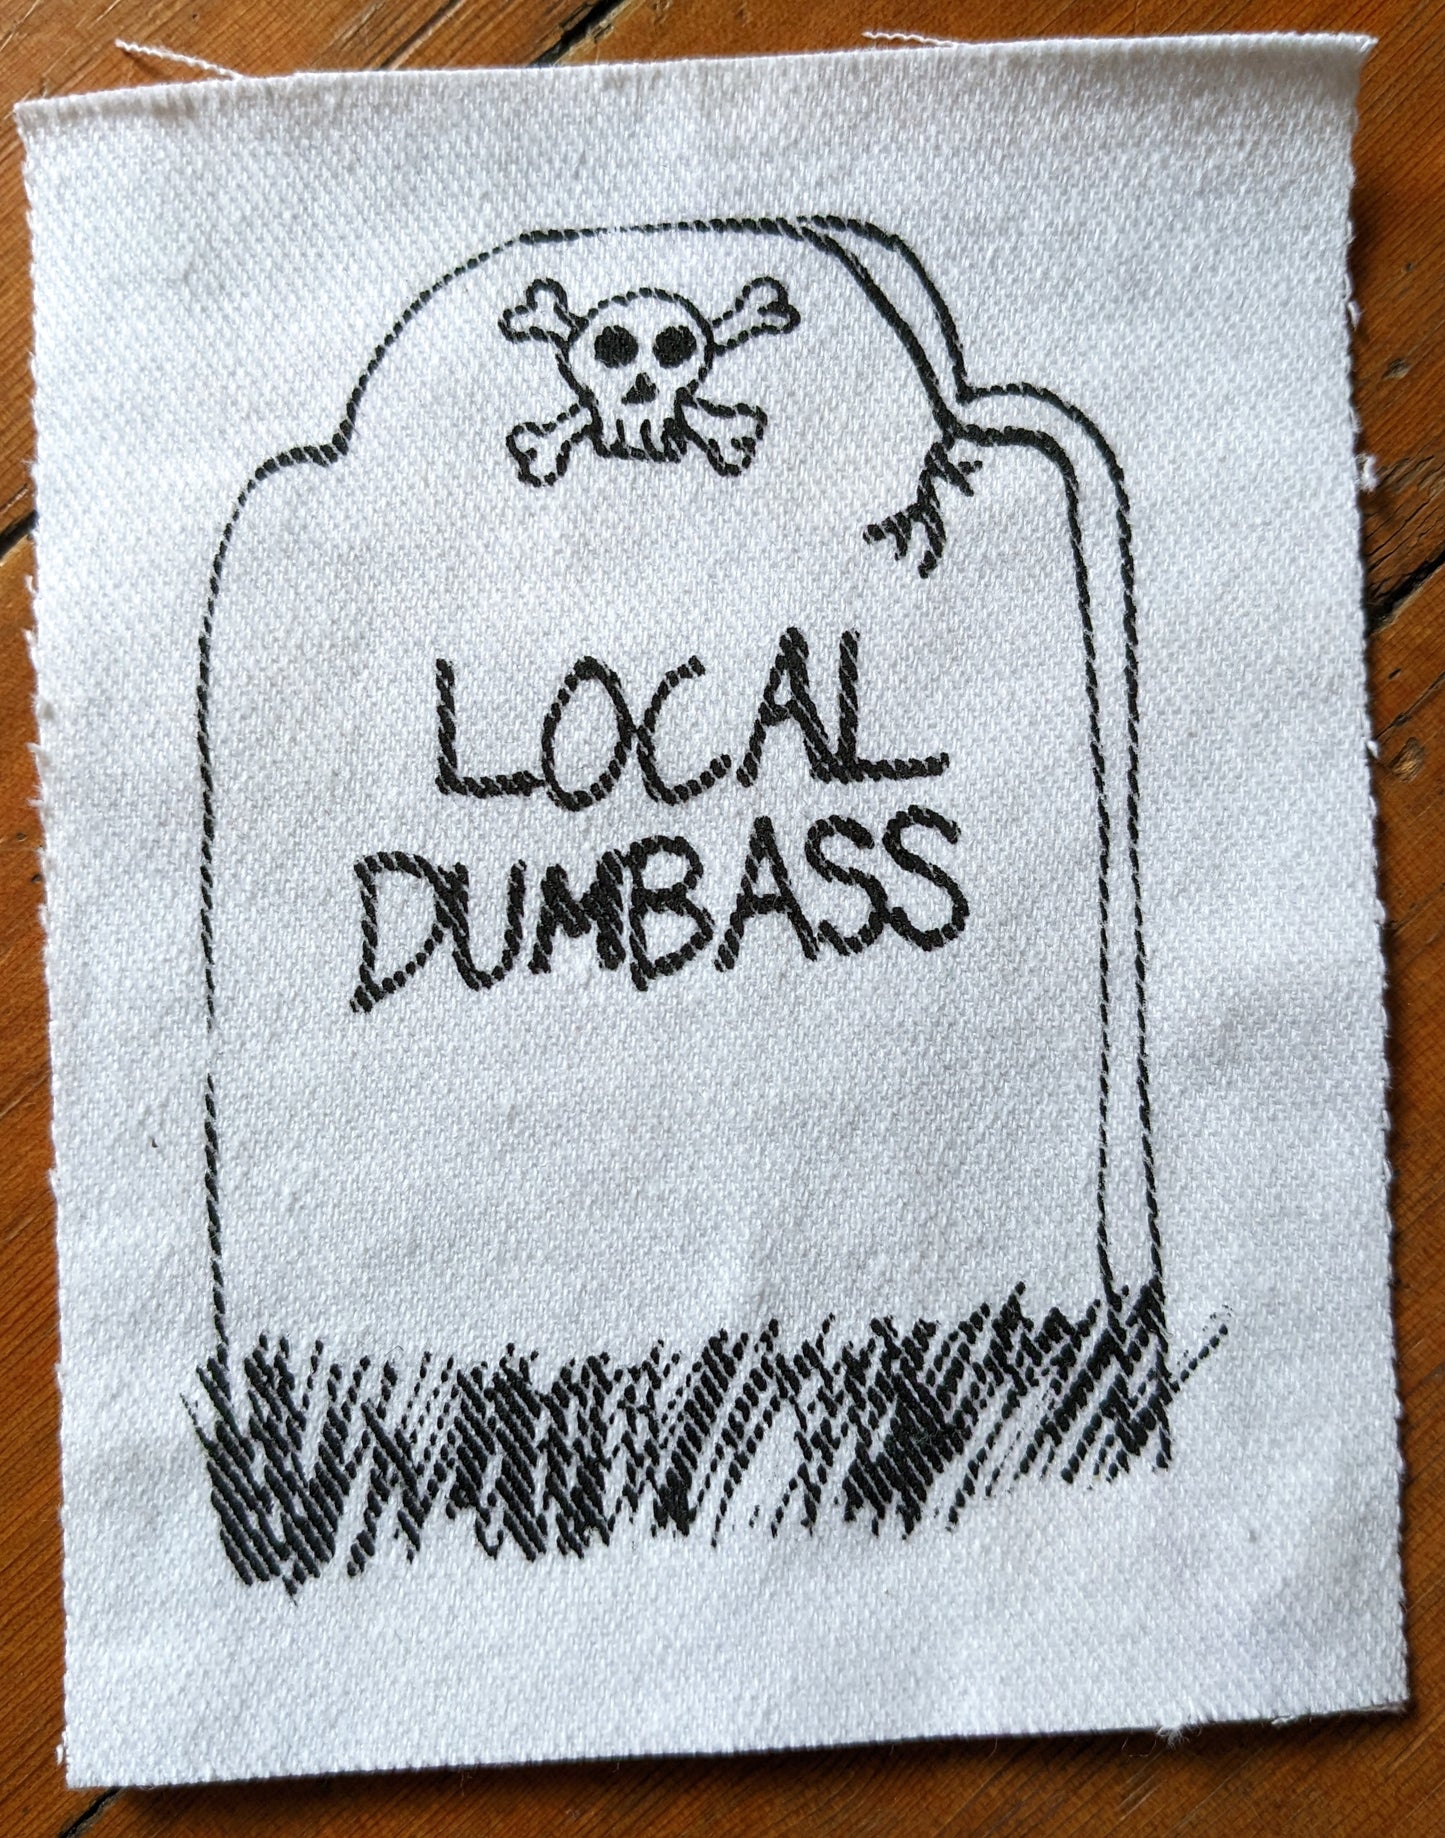 Local Dumbass Patch